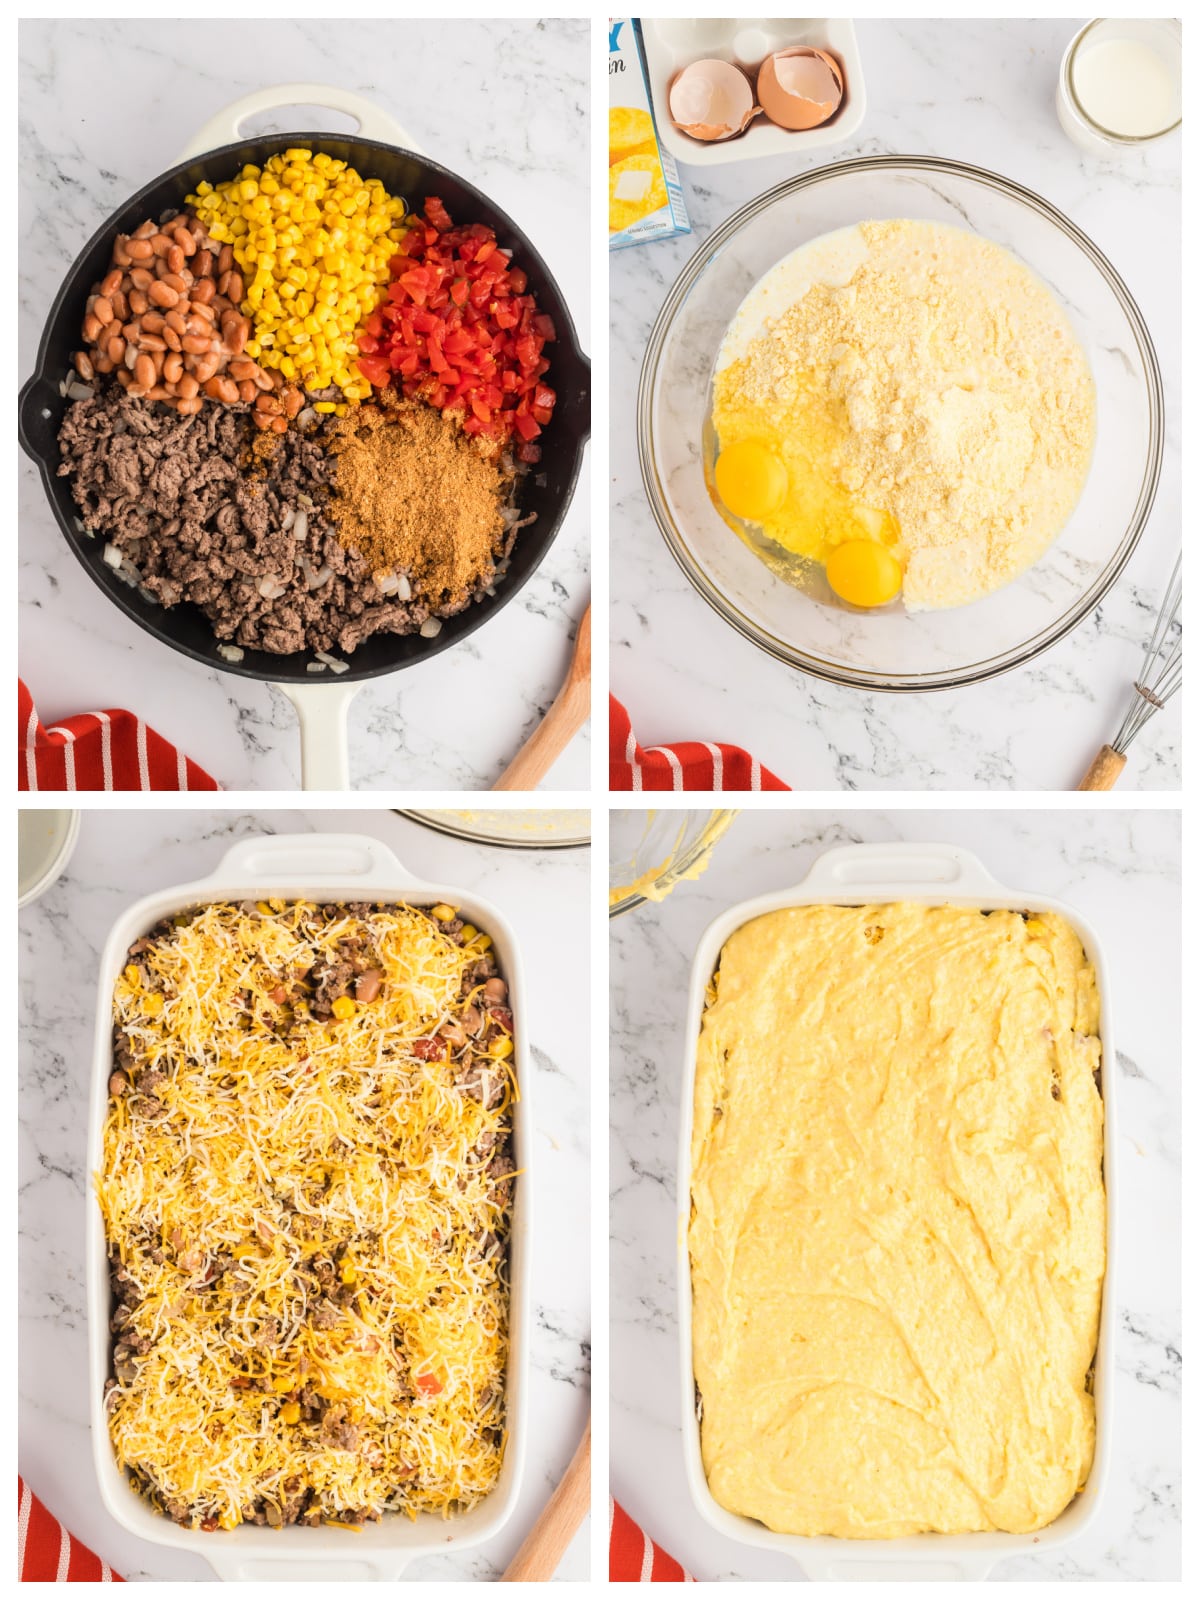 A step by step images to show instructions for this casserole recipe.